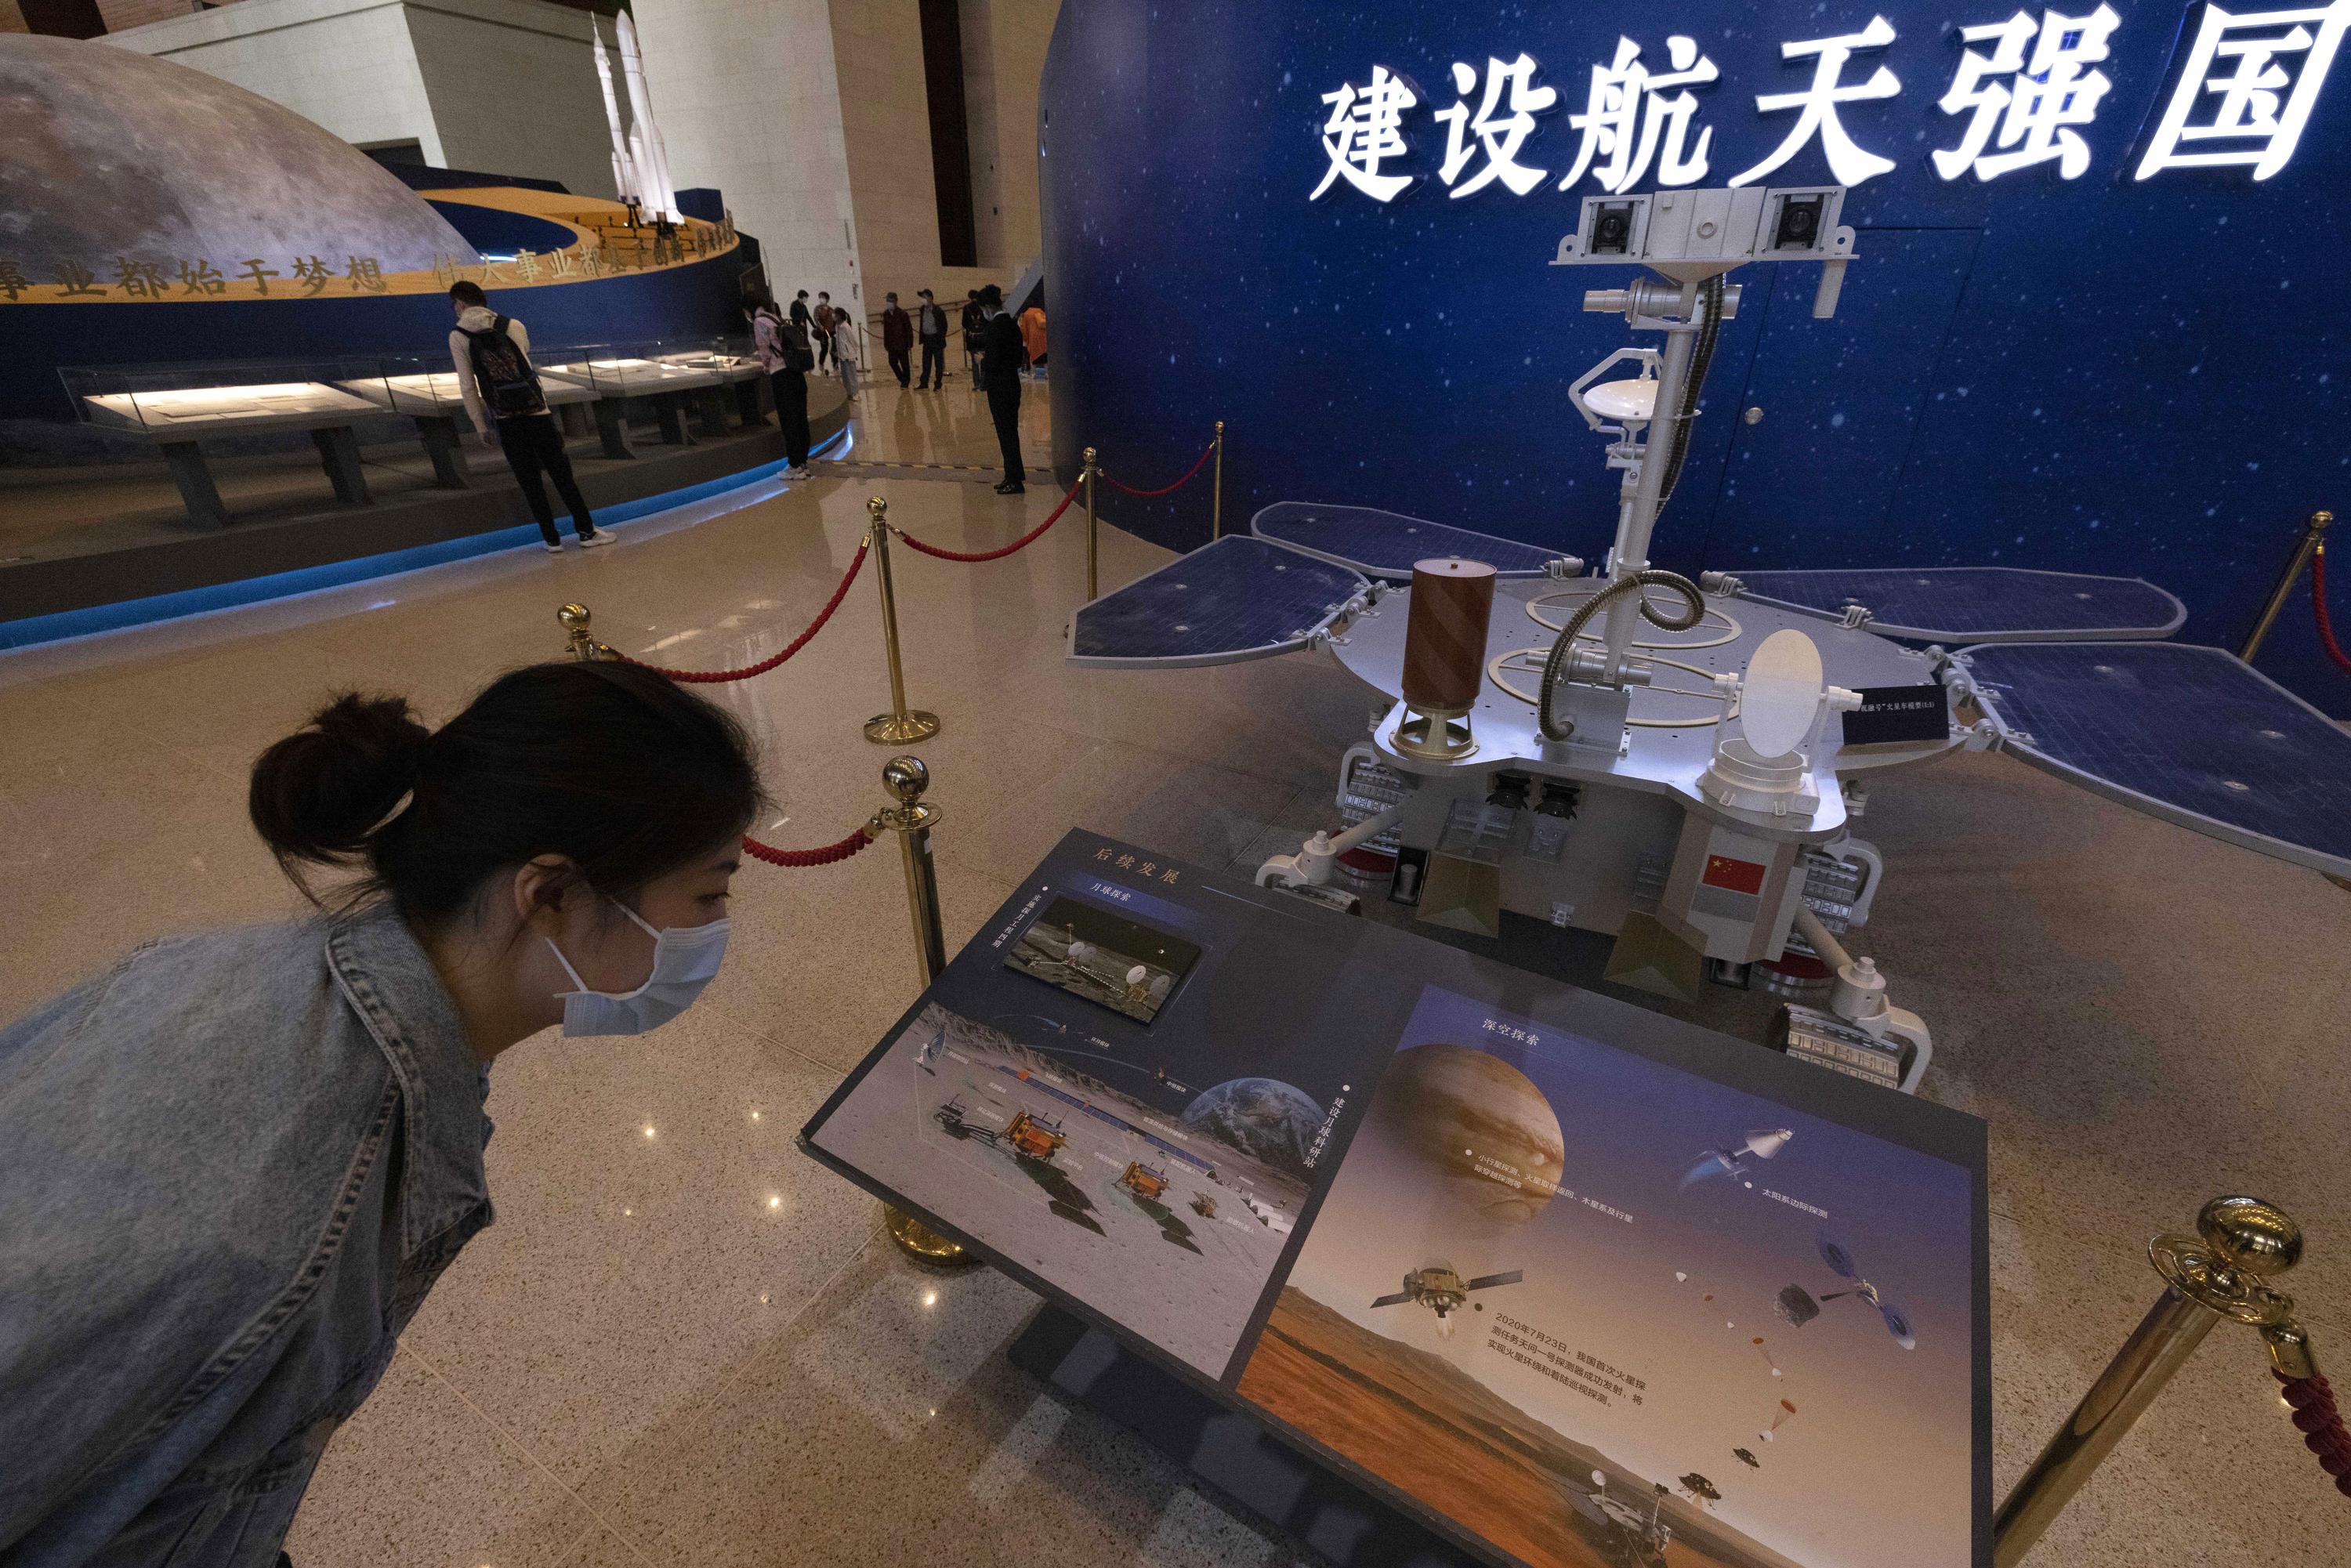 The official Xinhua News Agency said Saturday that the lander had touched down, citing the China National Space Administration. Plans call for a rover